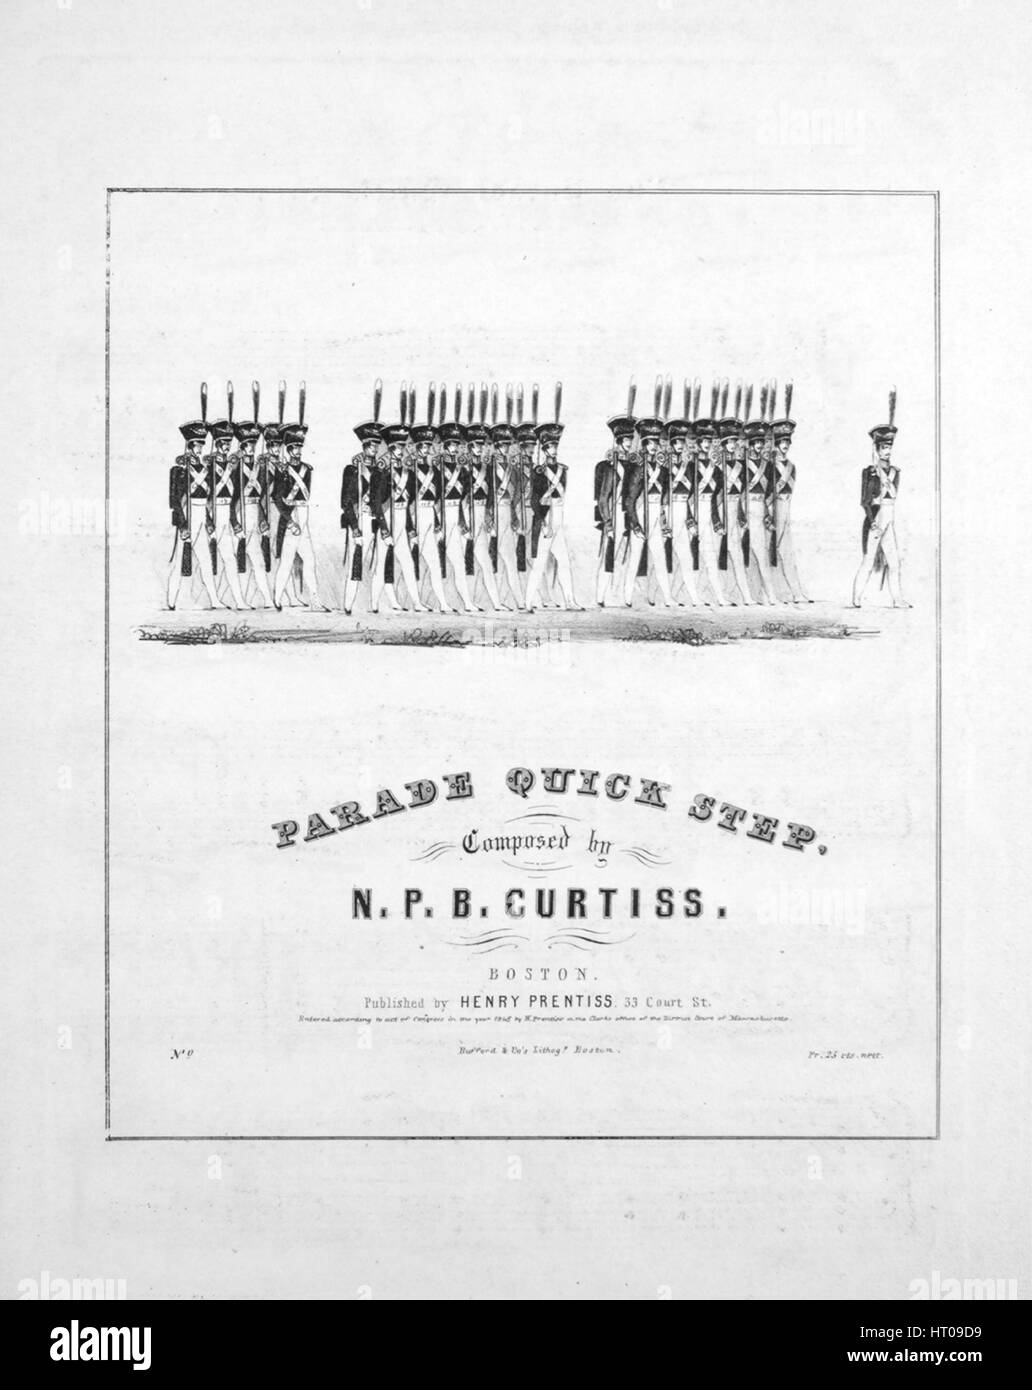 Sheet music cover image of the song 'Parade Quick Step', with original authorship notes reading 'Composed by NPB Curtiss', United States, 1845. The publisher is listed as 'Henry Prentiss, 33 Court St.', the form of composition is 'sectional', the instrumentation is 'piano', the first line reads 'None', and the illustration artist is listed as 'Bufford and Co.'s Lithogy. Boston'. Stock Photo